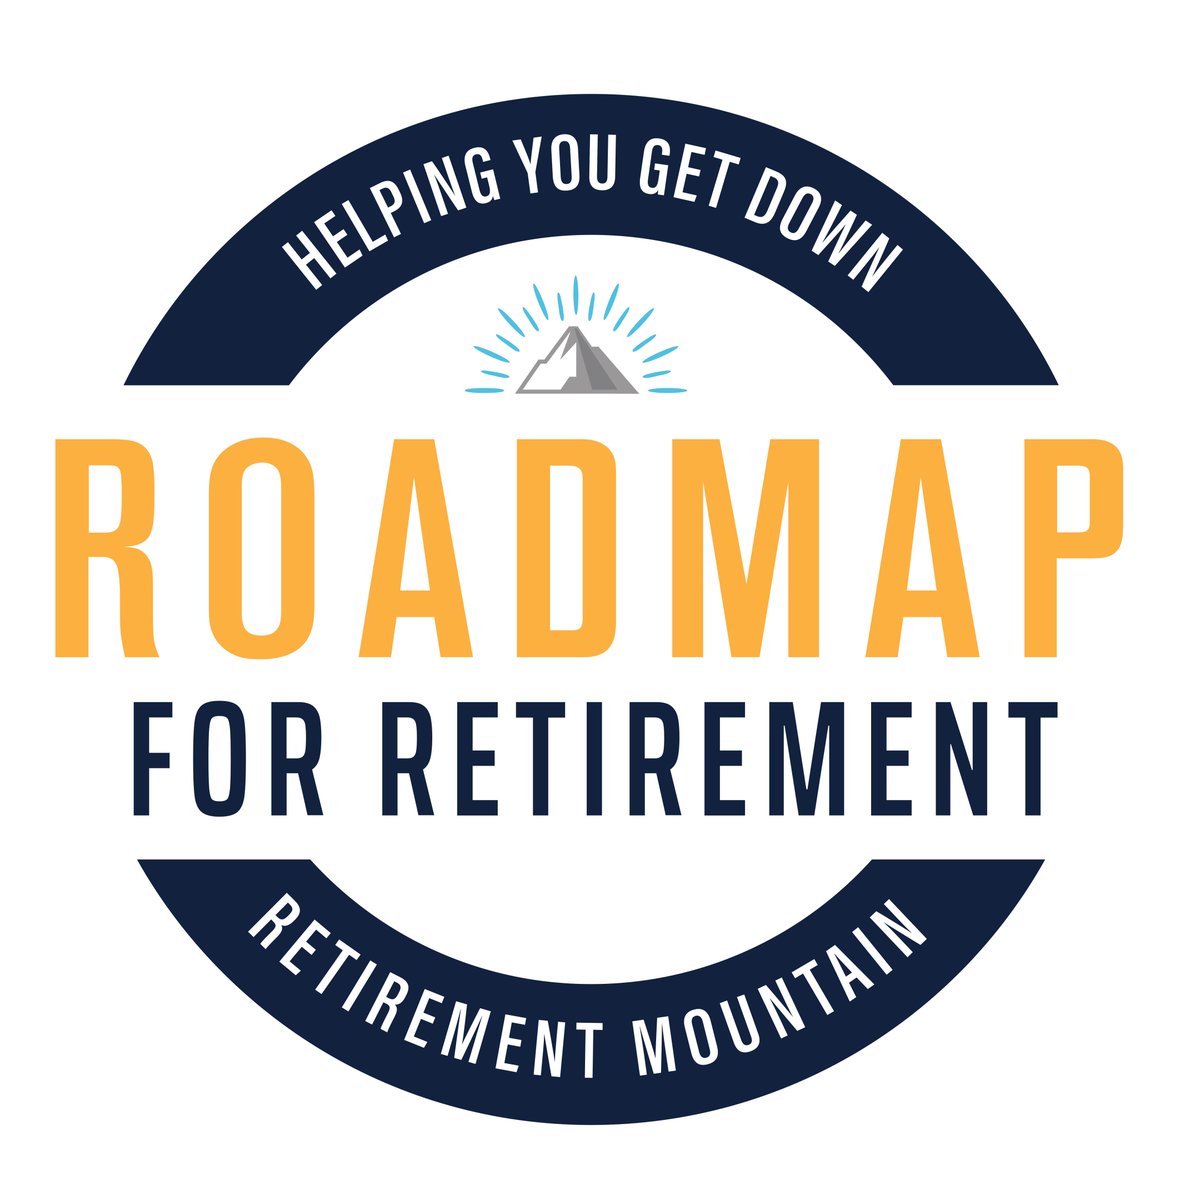 Click here to learn more about each of the retirement risks we cover in your Roadmap for Retirement 👉 bit.ly/41zDpyR
#retirement #financialservices #stockmarket #investing #retirementincome #marketflashlight